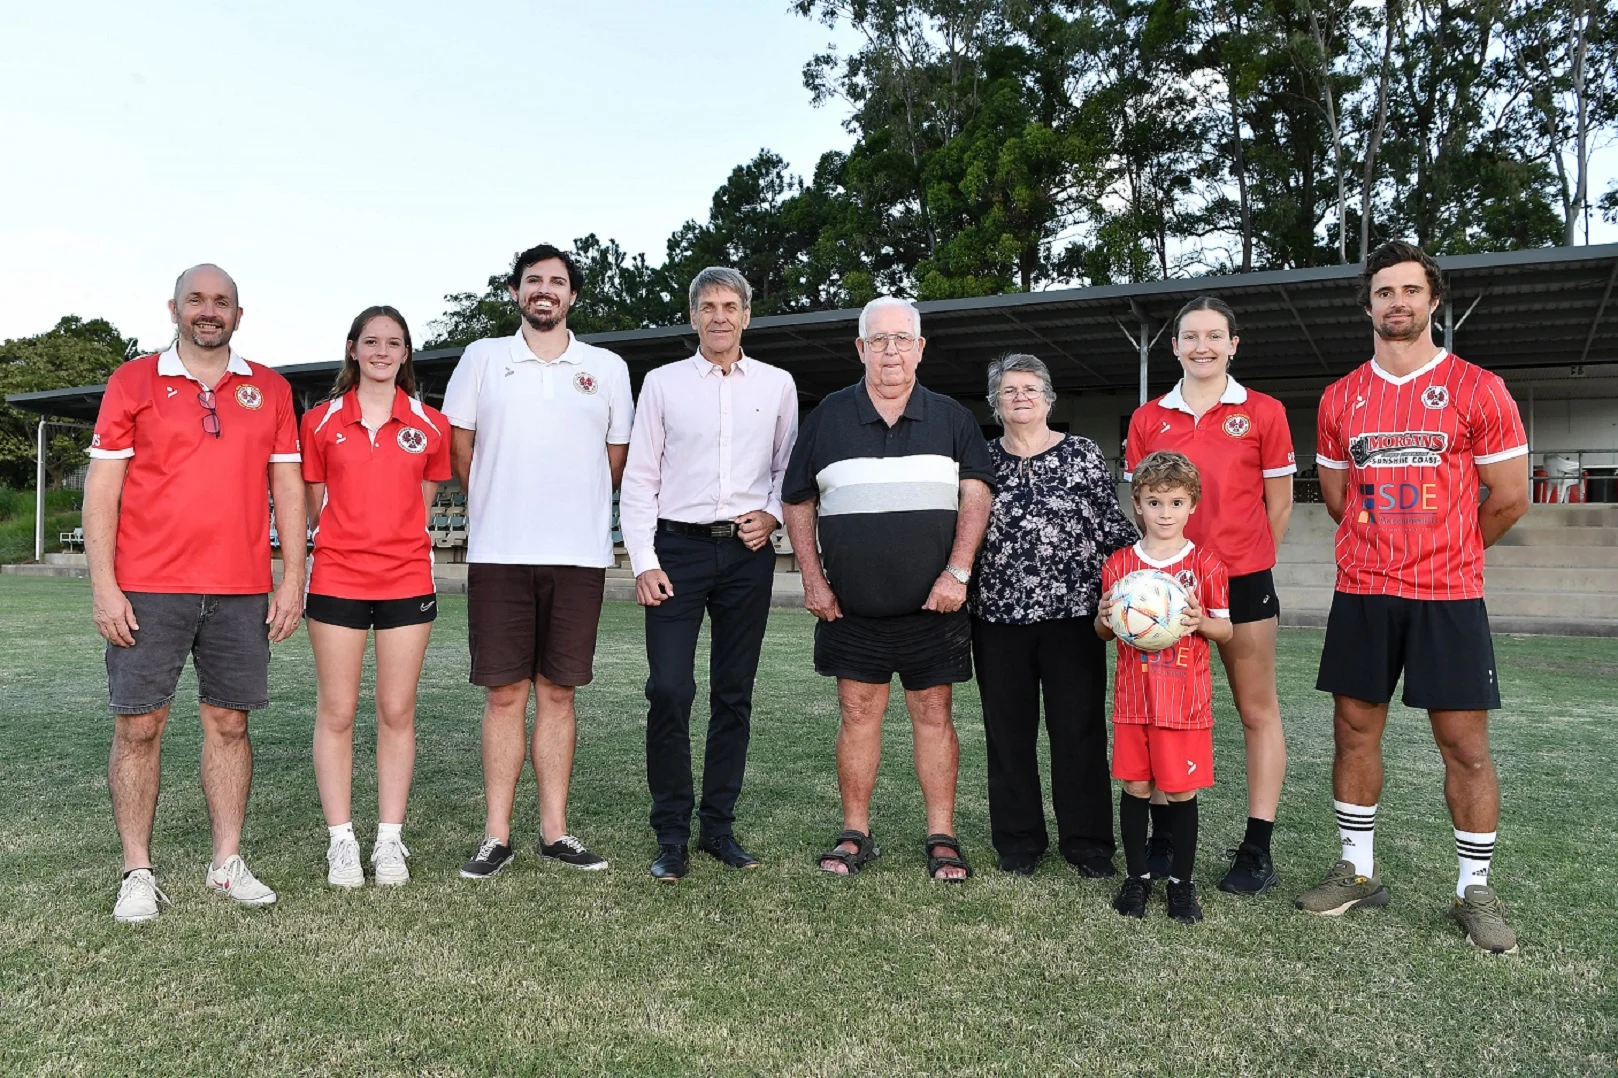 (Left to right) NYU Football Club President Jeff McColl with his daughter Lily McColl, Lachlan O’Keefe, Sunshine Coast Council Division 10 Cr David Law, Peter and Jenny Harth, their great-grandson Ari Harth (at front), Sophie Day, and Peter and Jenny’s grandson Jono Harth.